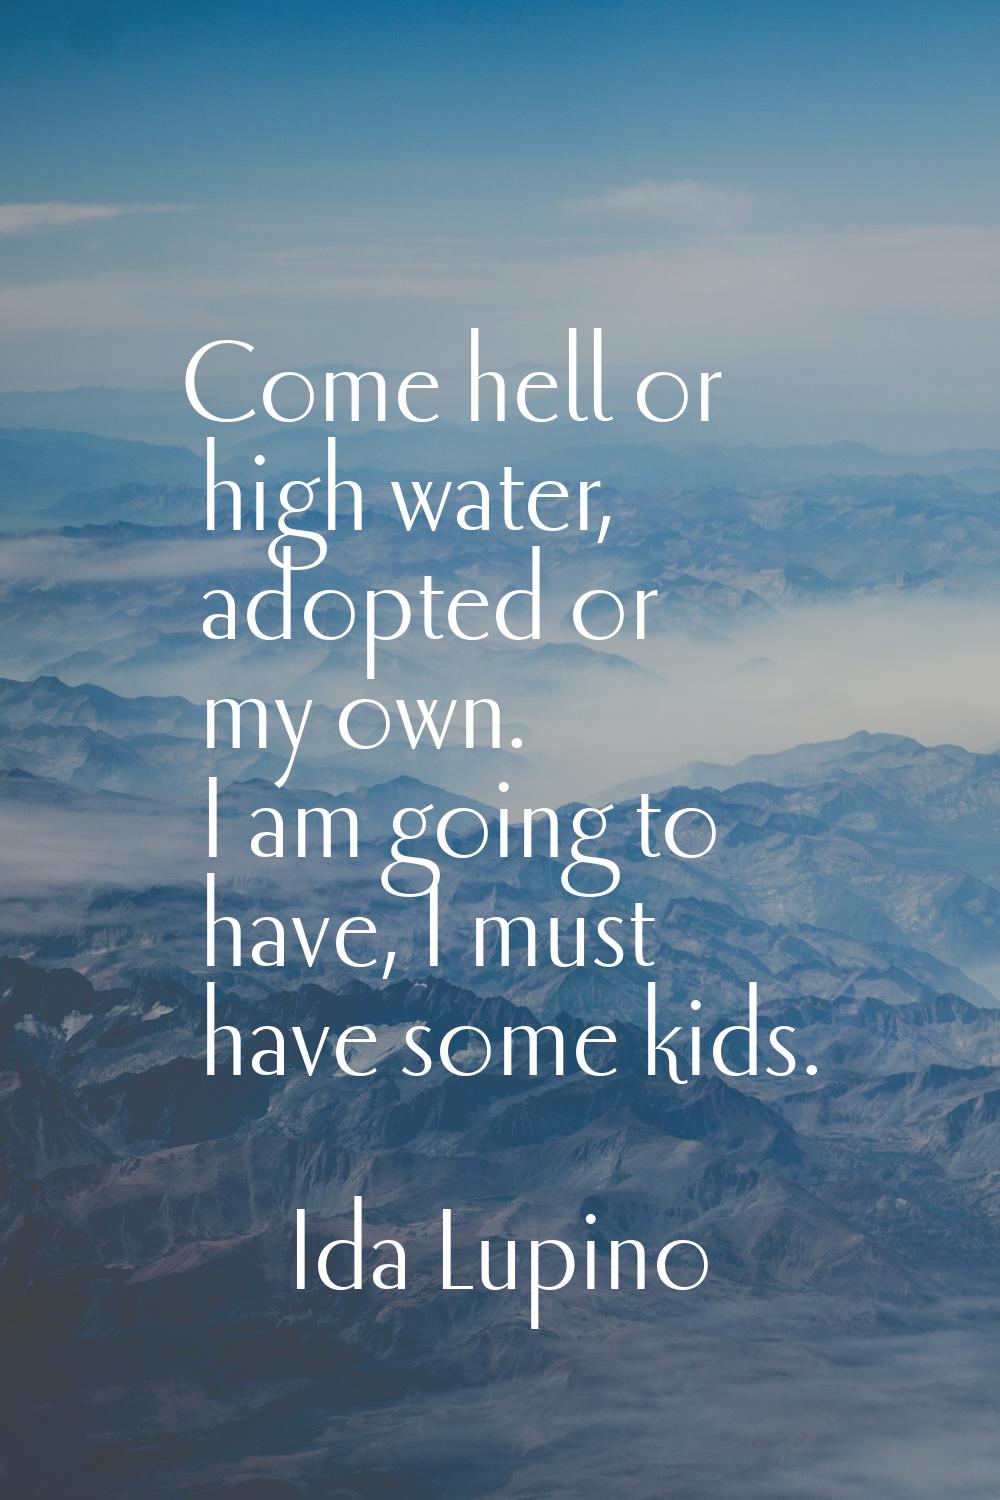 Come hell or high water, adopted or my own. I am going to have, I must have some kids.